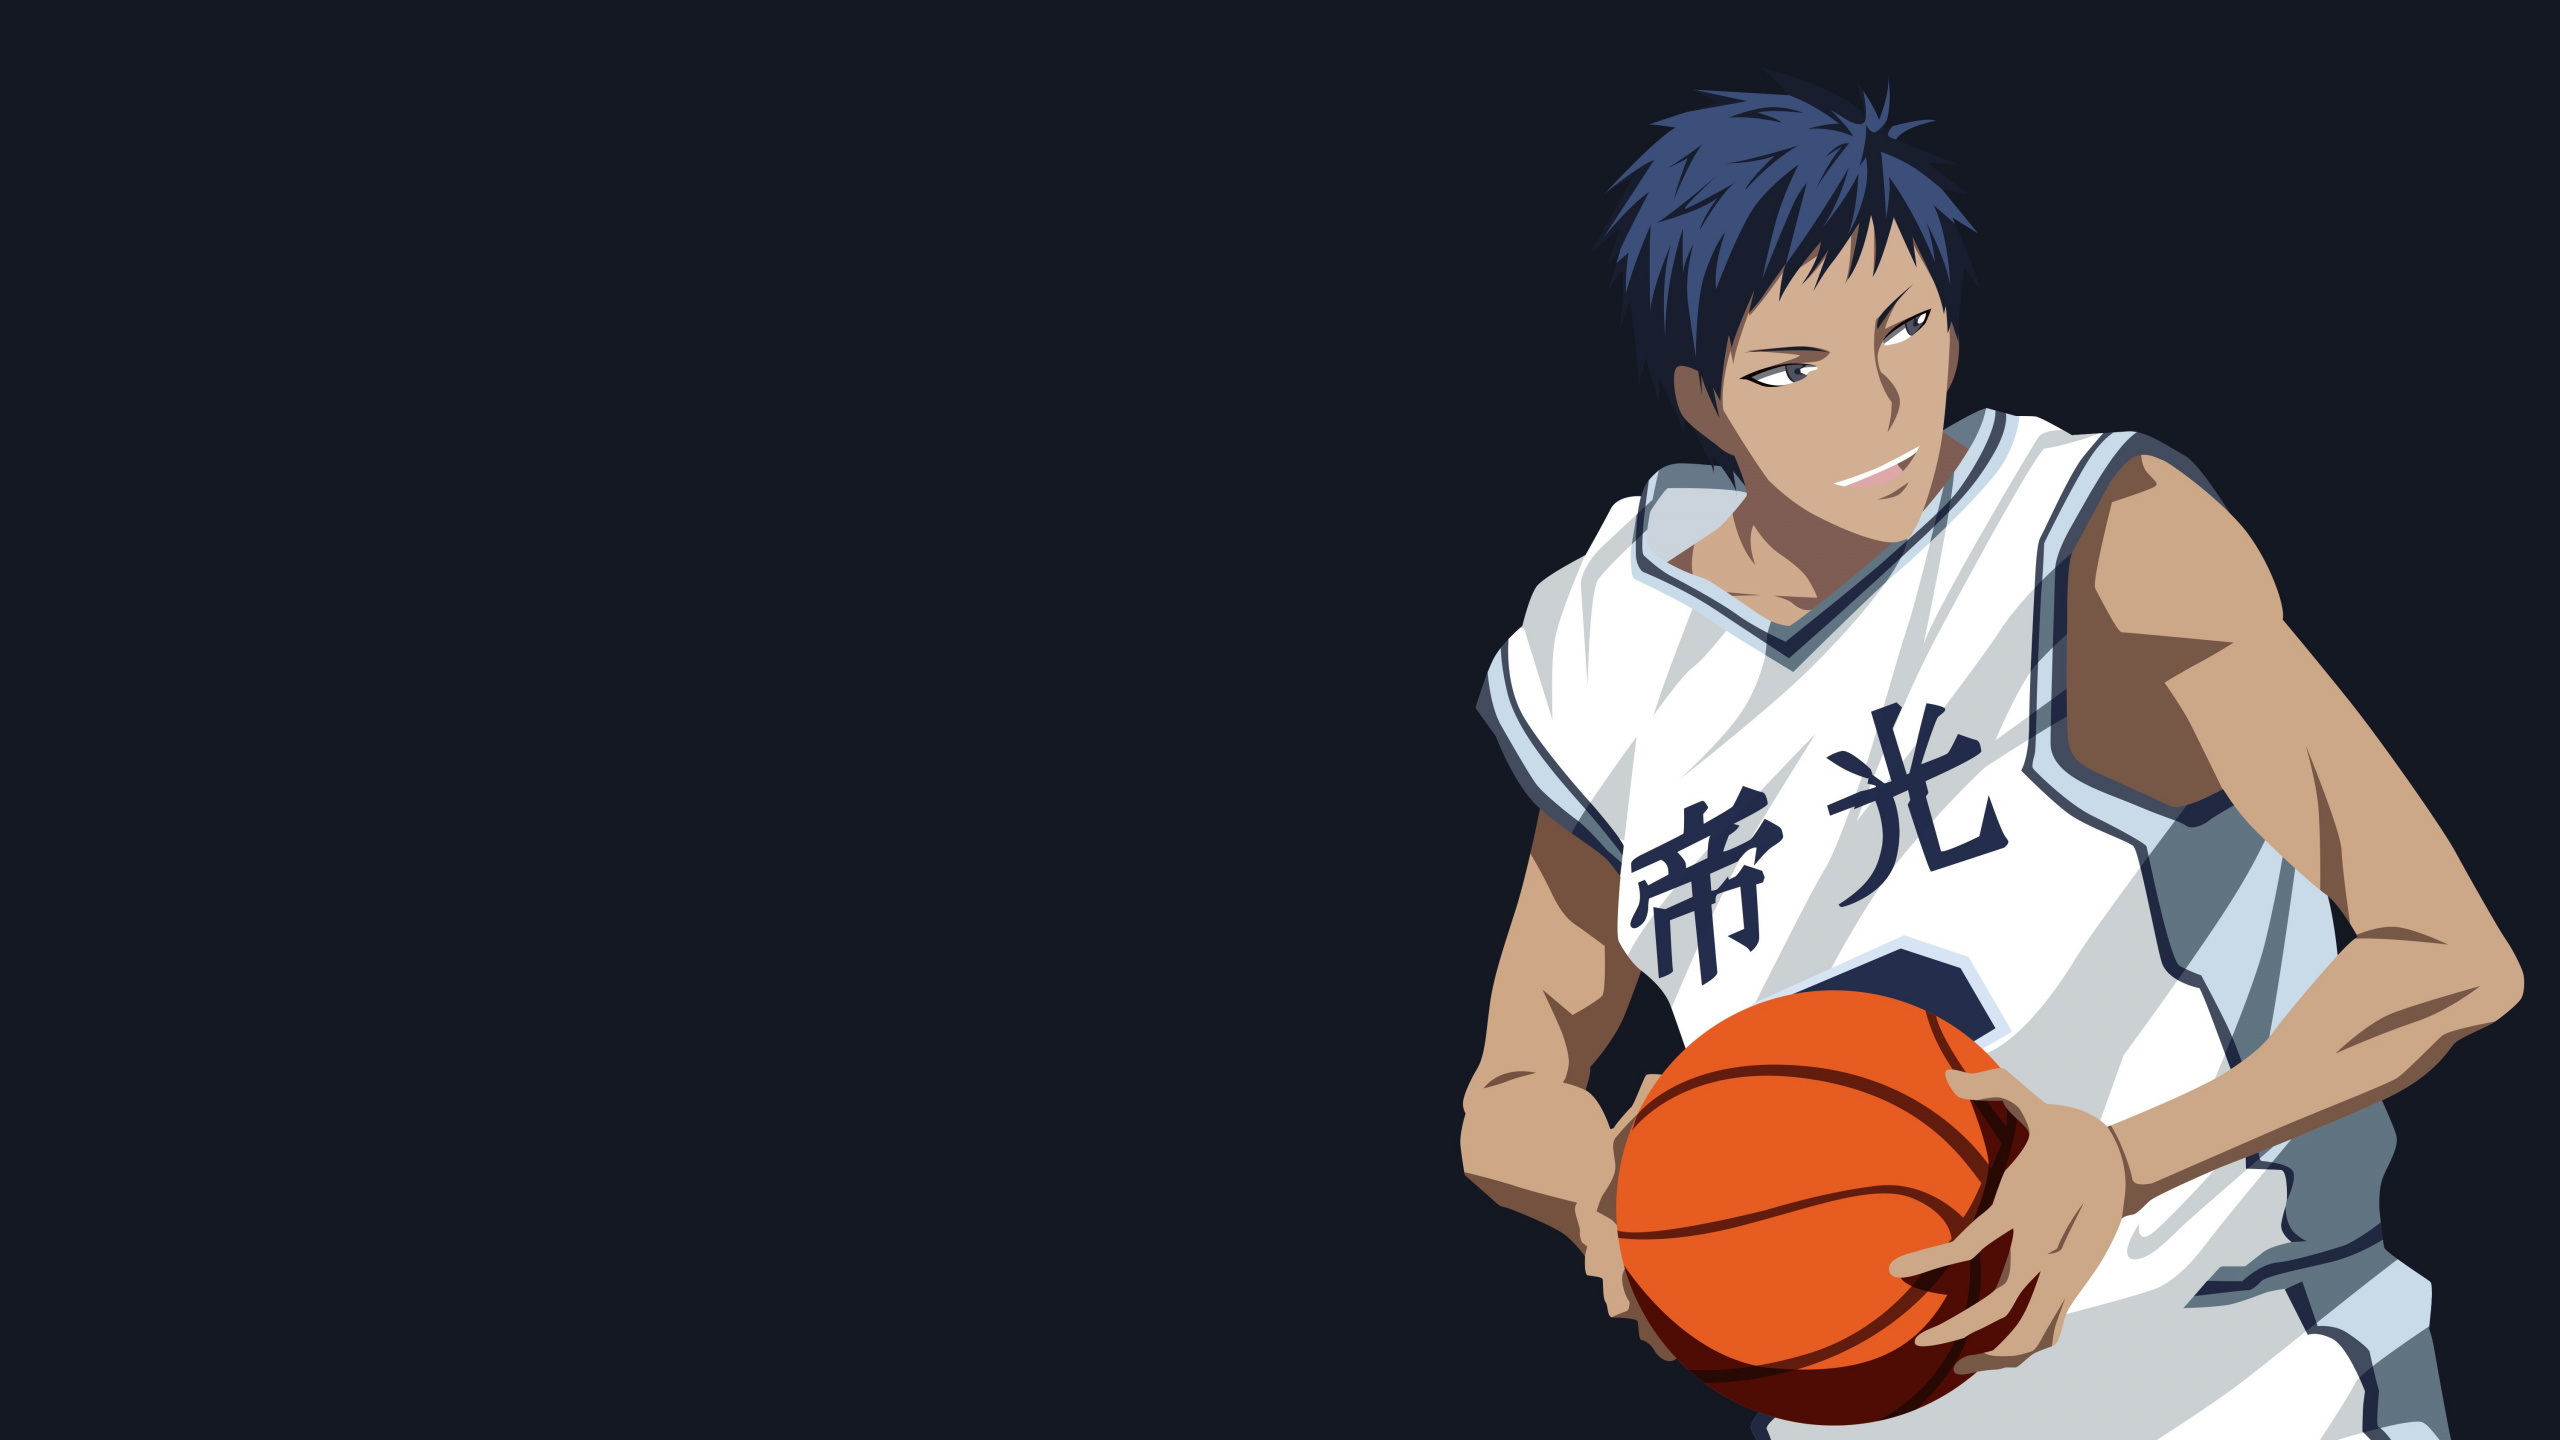 Personnage D'anime Masculin Aux Cheveux Noirs Tenant le Basket-ball. Wallpaper in 2560x1440 Resolution